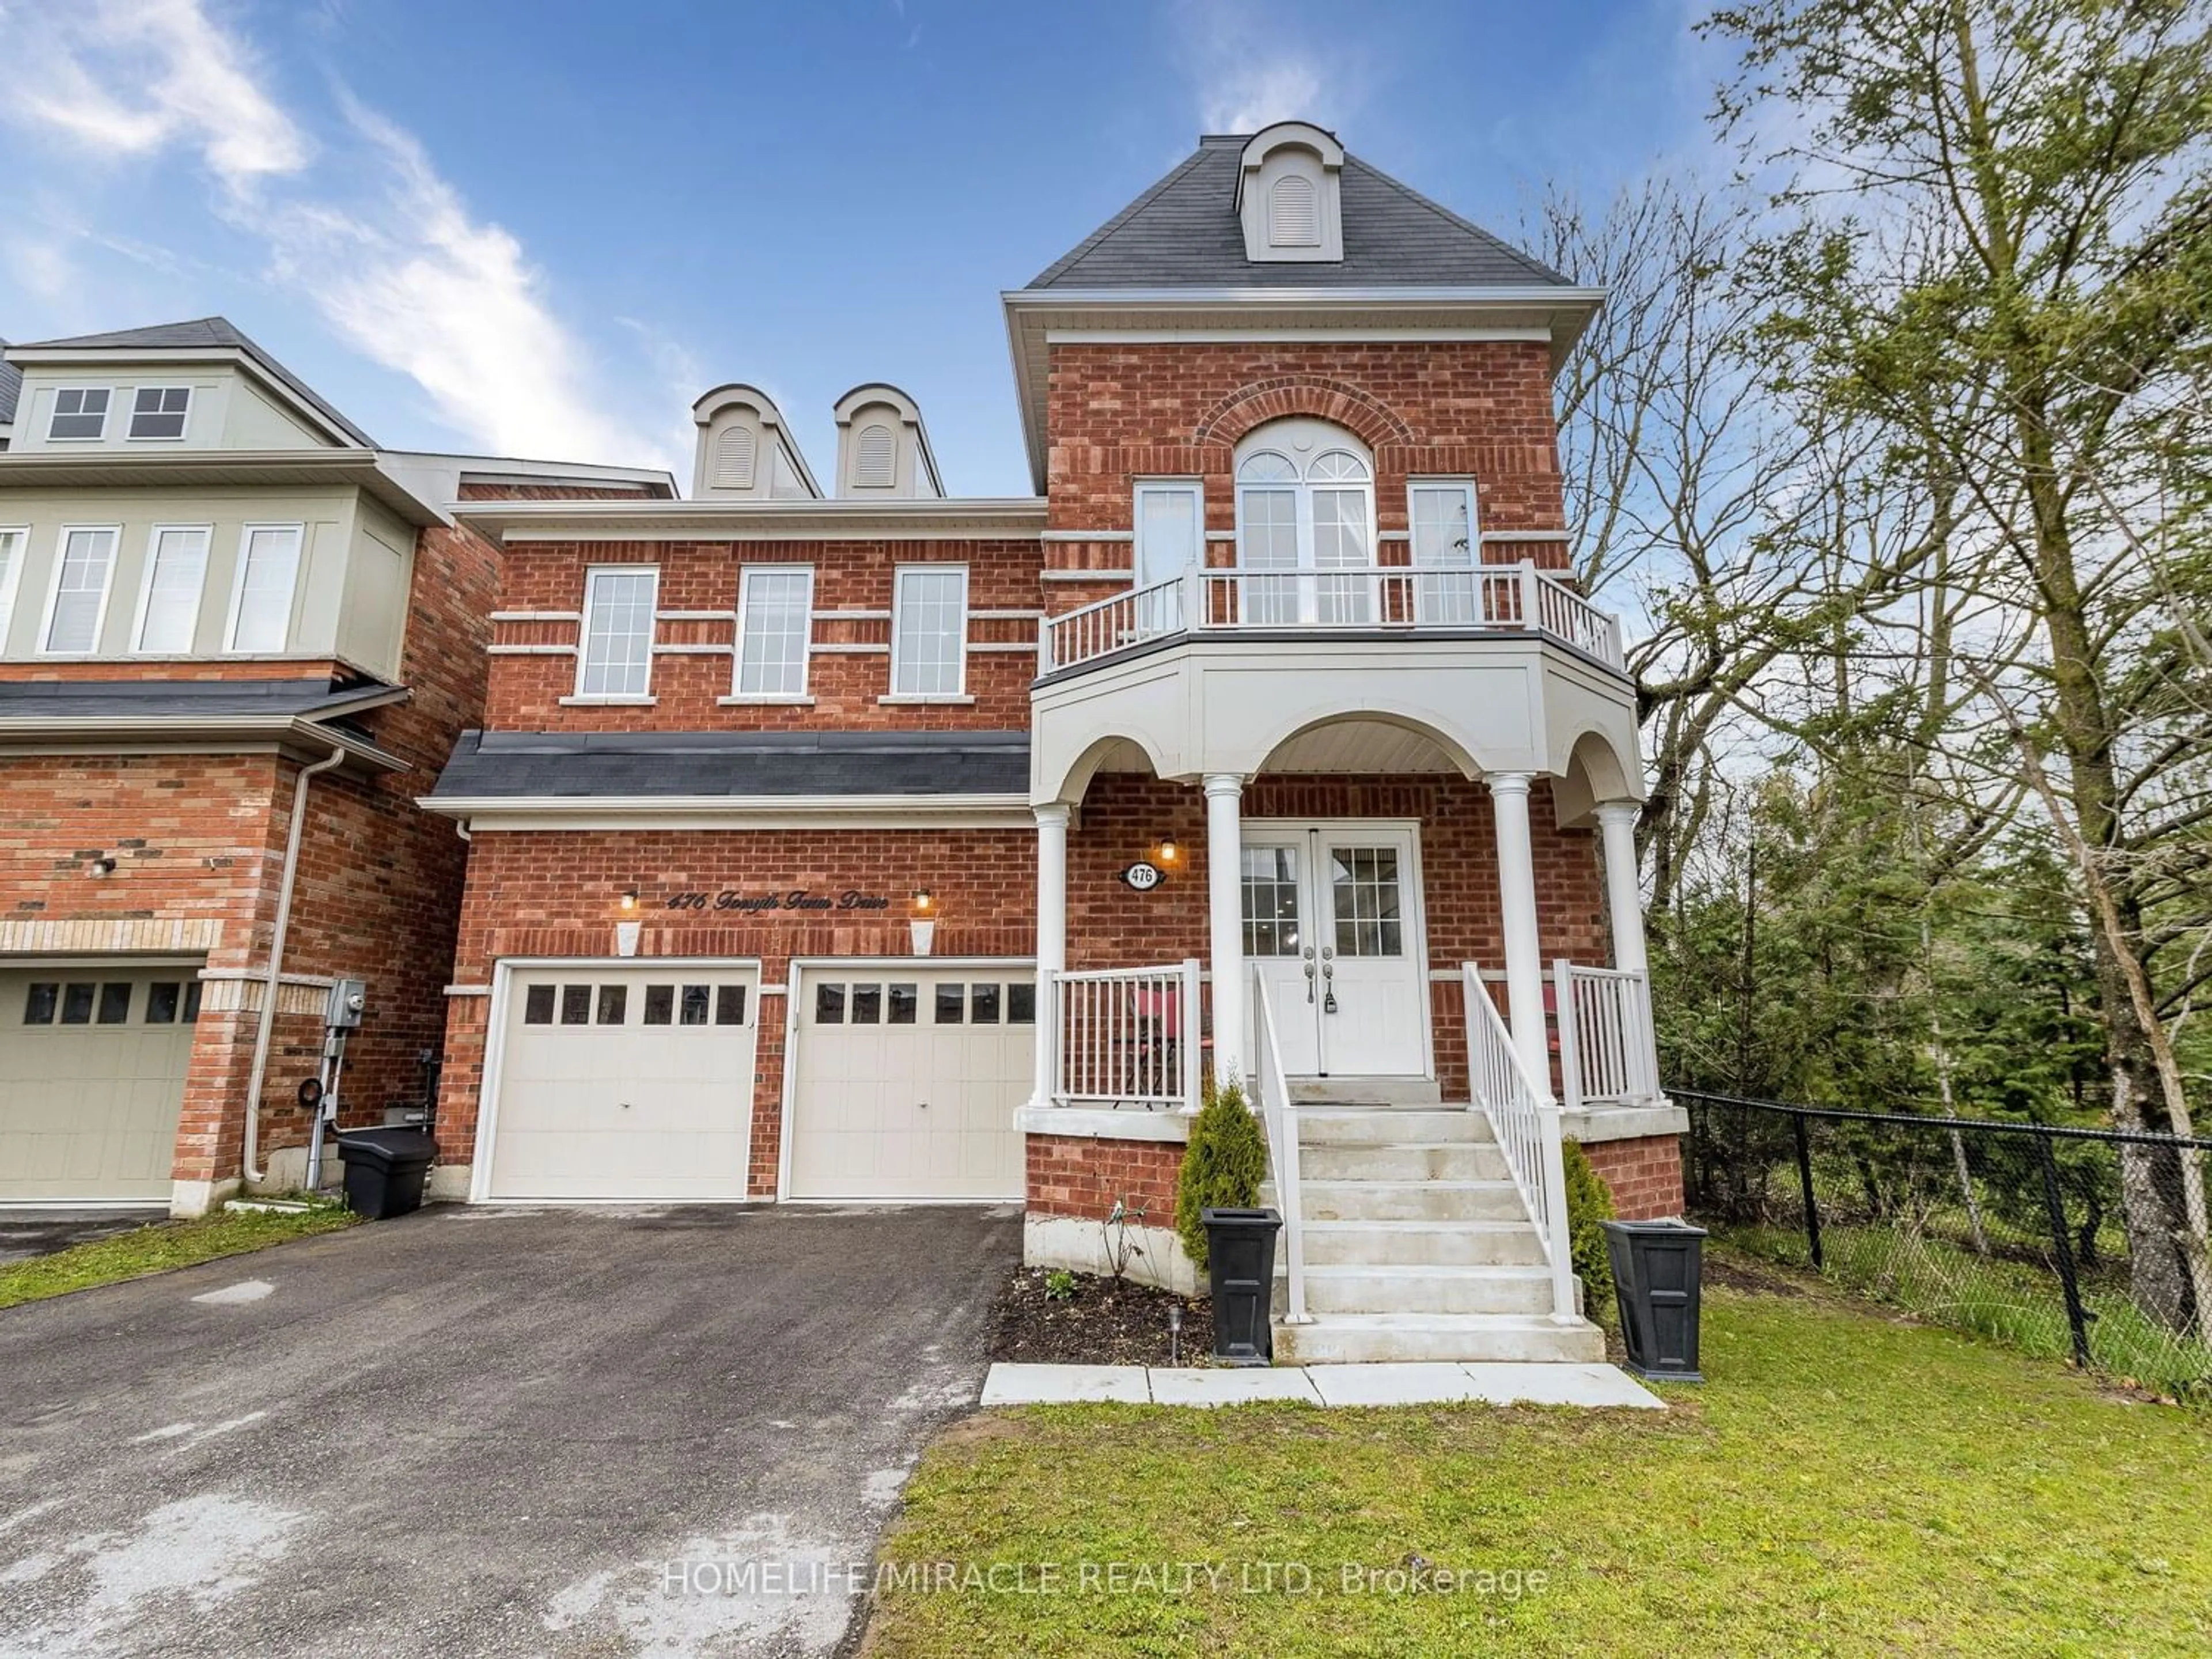 Home with brick exterior material for 476 Forsyth Farm Dr, Whitchurch-Stouffville Ontario L4A 4P1